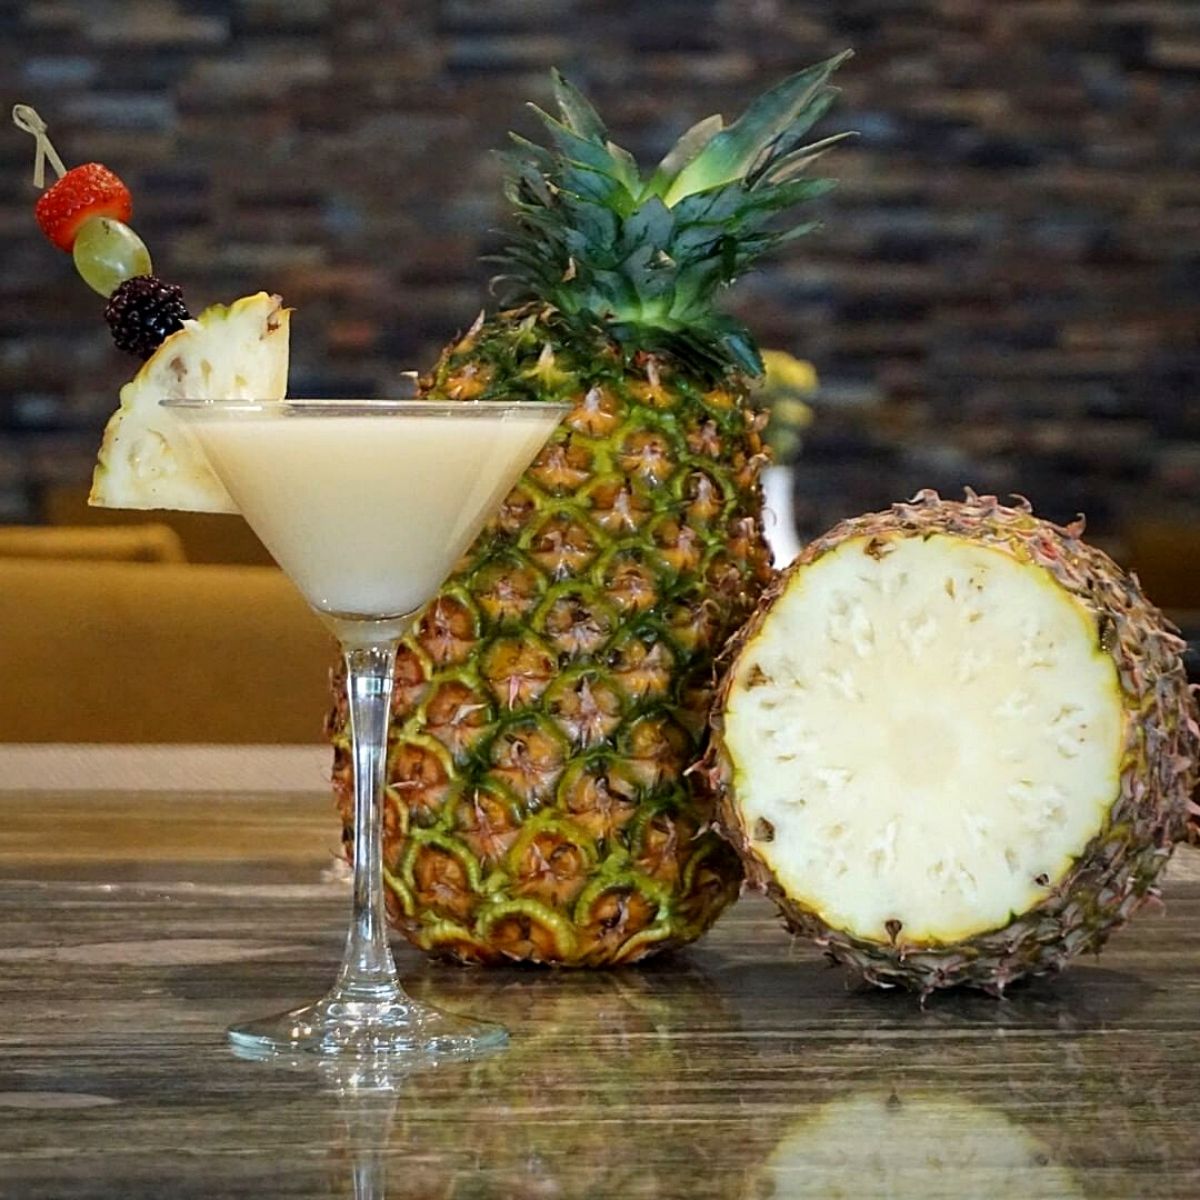 International Pineapple Day pays homage to the pineapple's eventful journey across continents